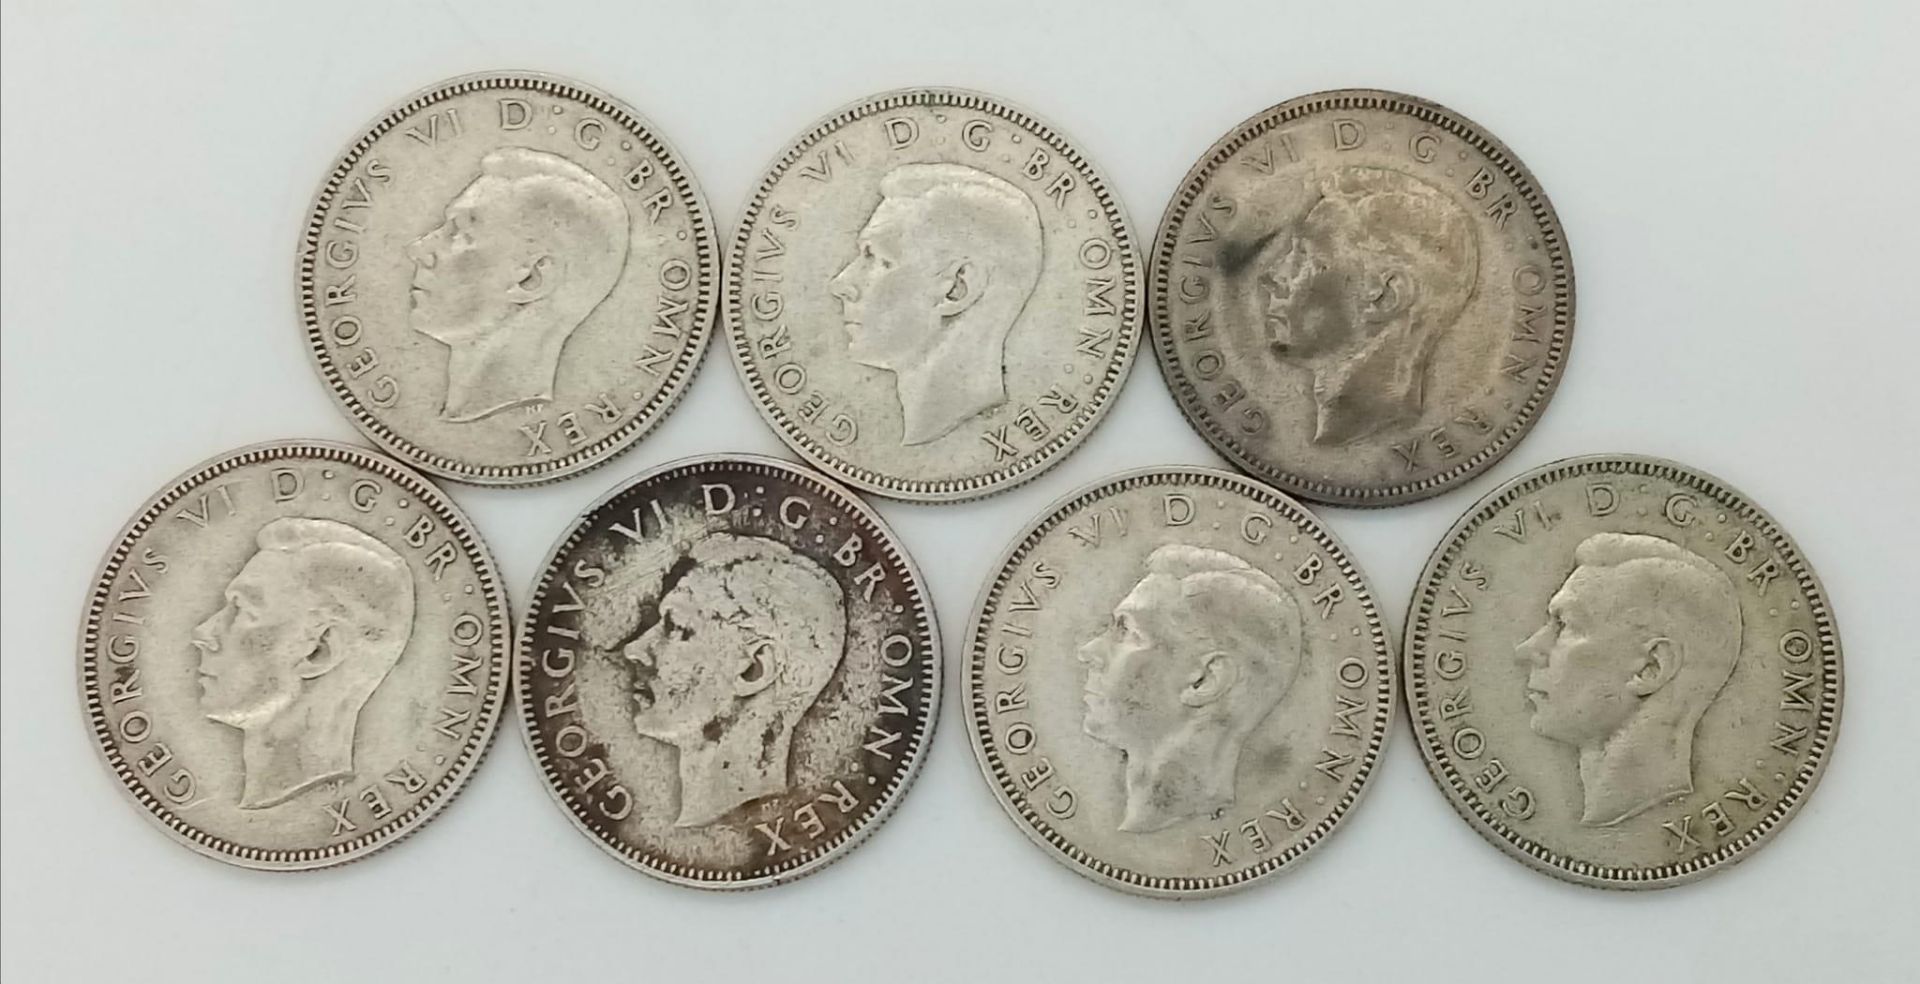 A Full Set of WW2 1939-1945 Inclusive Silver Shillings all Very Fine Condition (Sheldon Scale). 39. - Image 2 of 2